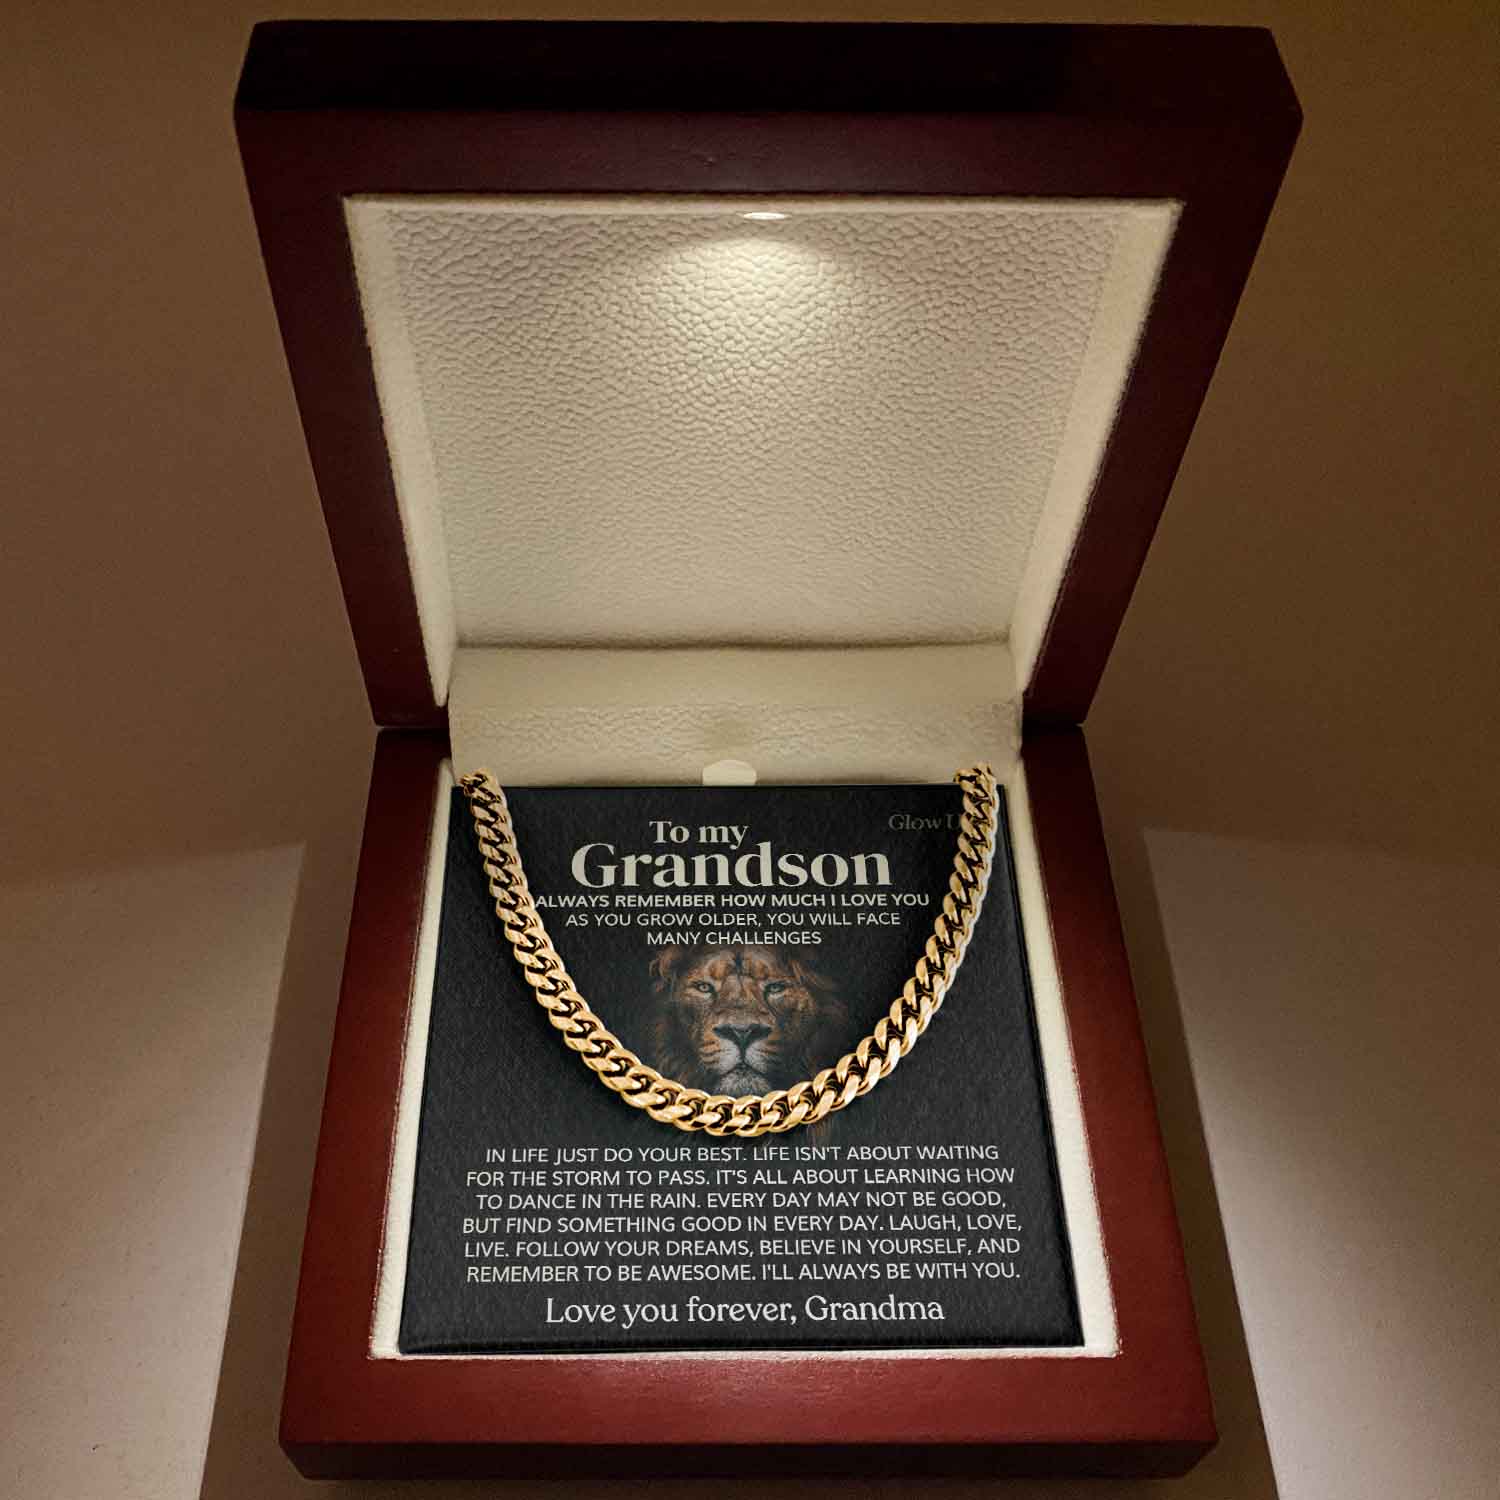 ShineOn Fulfillment Jewelry 14K Yellow Gold Finish / Luxury LED Box To my Grandson - In life just do your best - Cuban LInk Chain